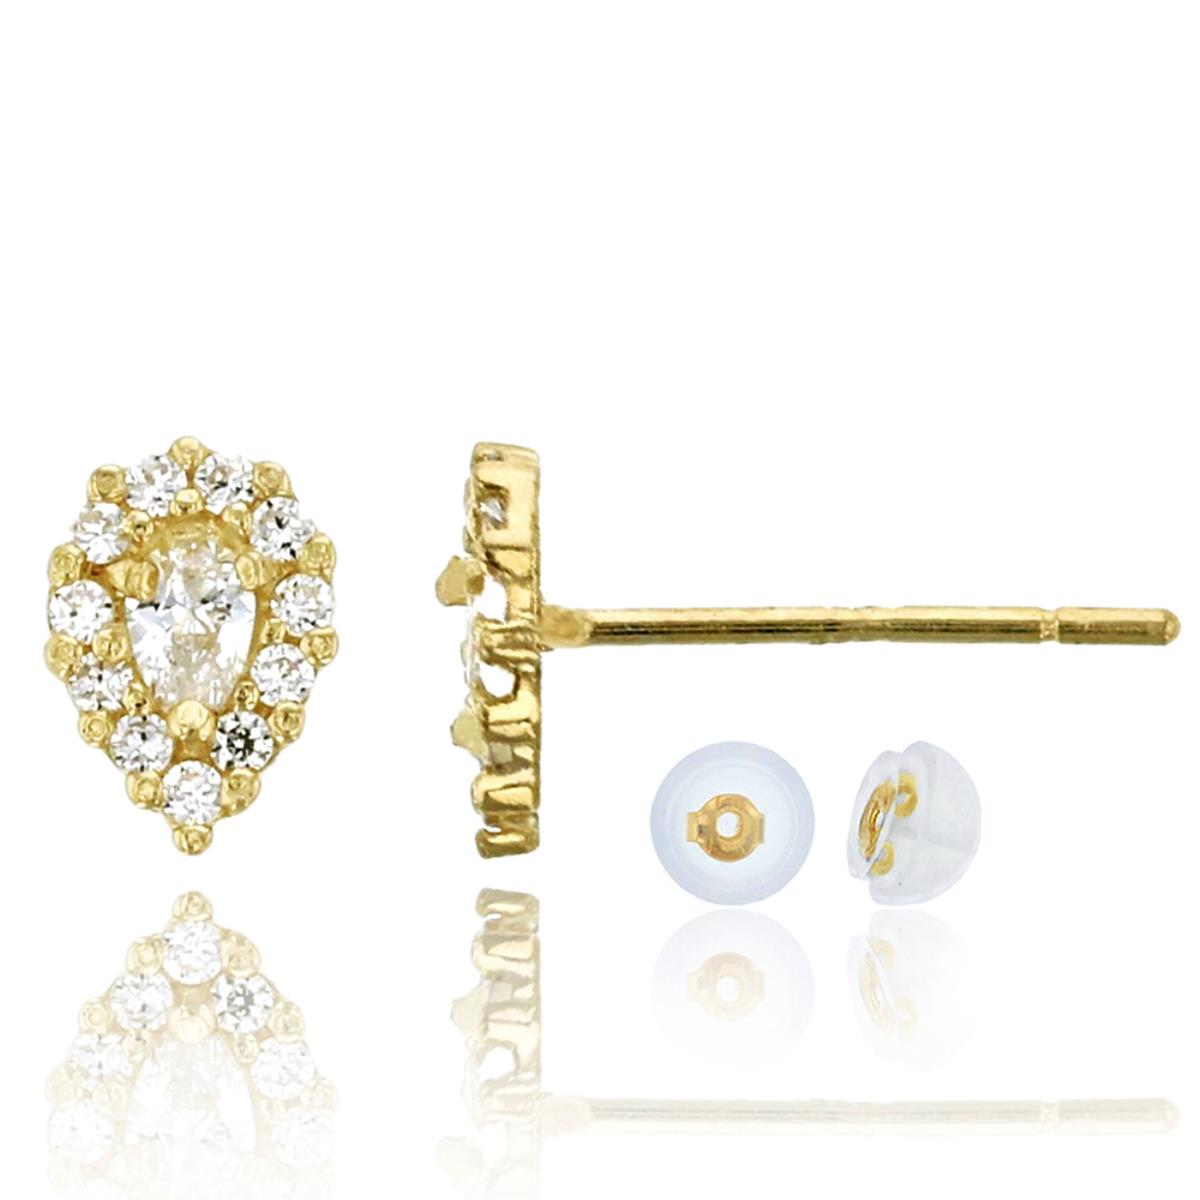 10K Yellow Gold Pave 4X3mm Pear Halo Stud Earring & 10K Silicone Back